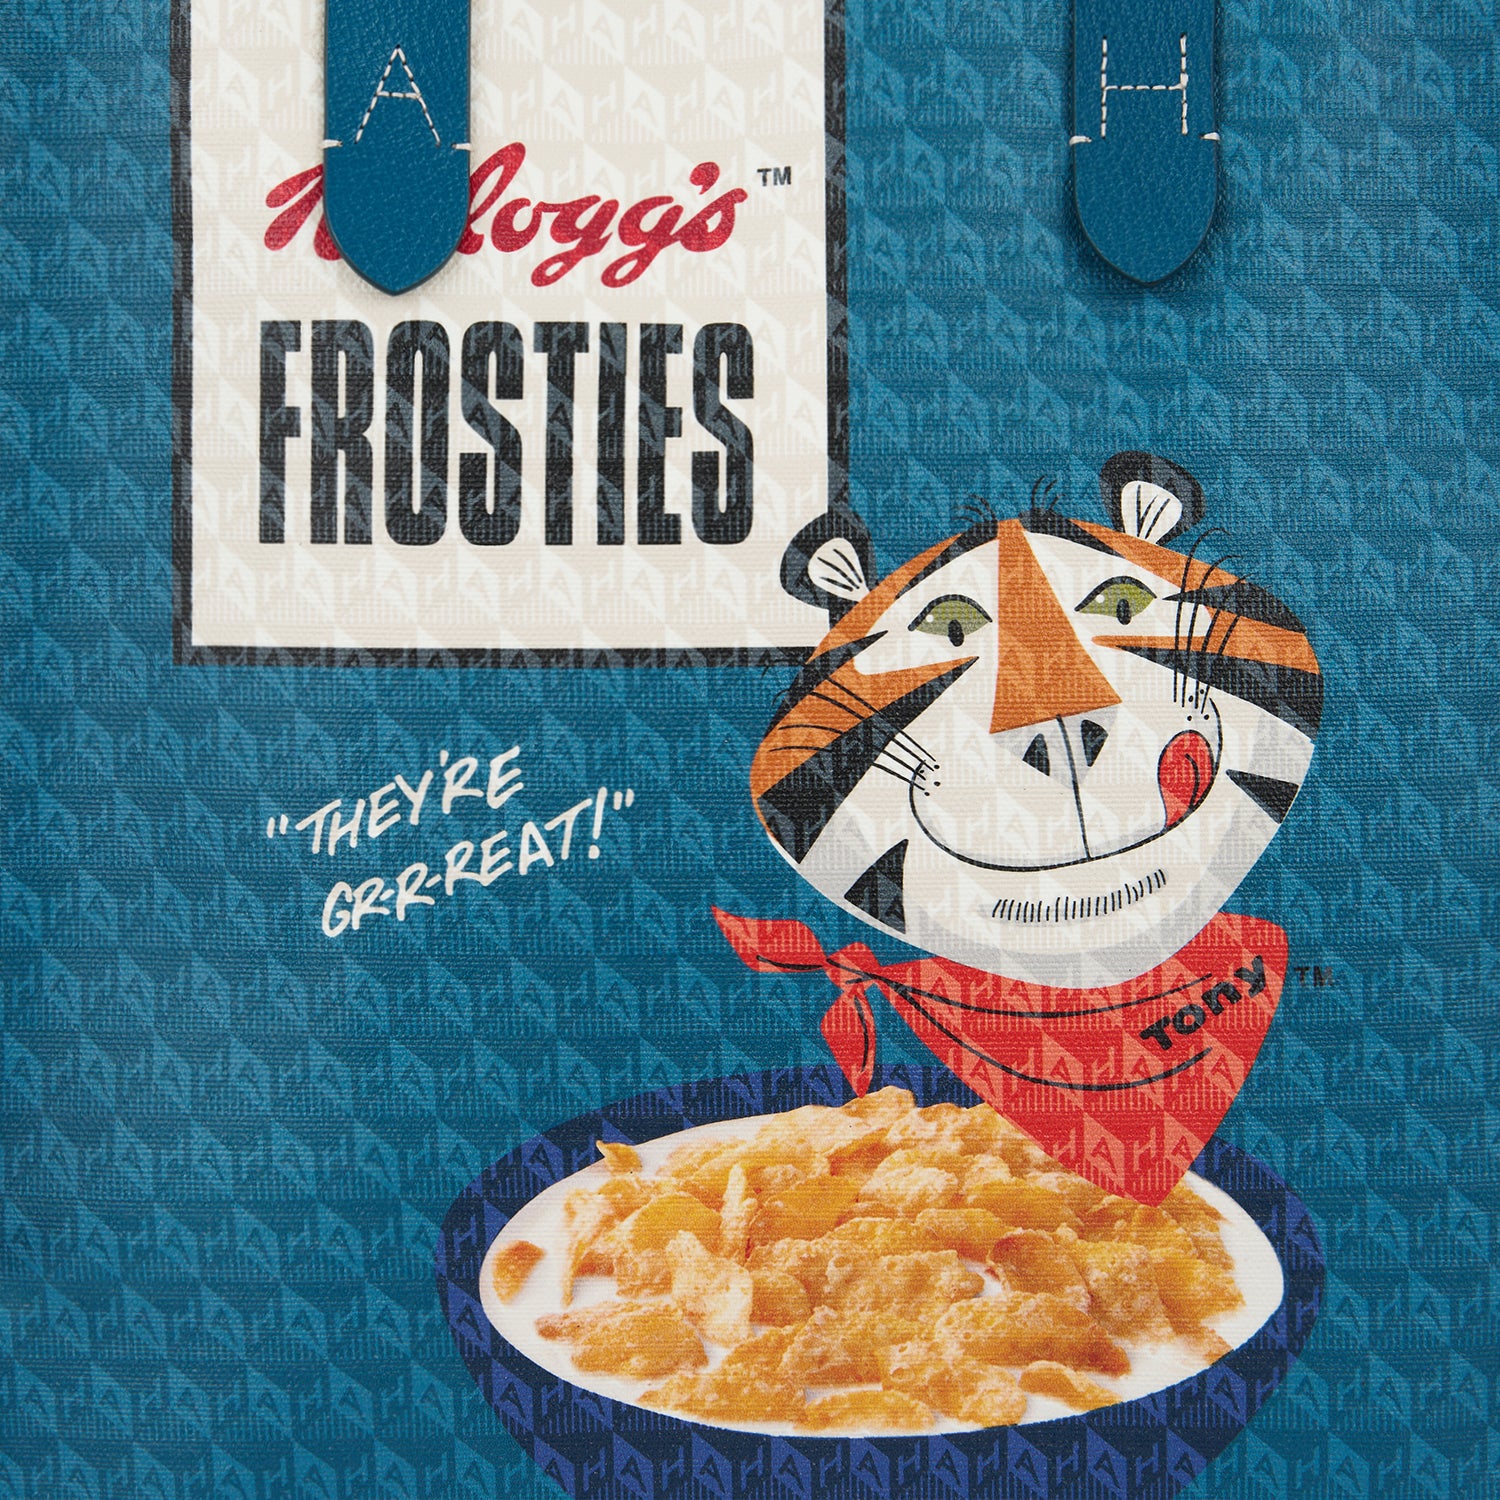 「Frosties」ショッパー -

                  
                    Recycled Canvas in Light Petrol -
                  

                  Anya Hindmarch JP
